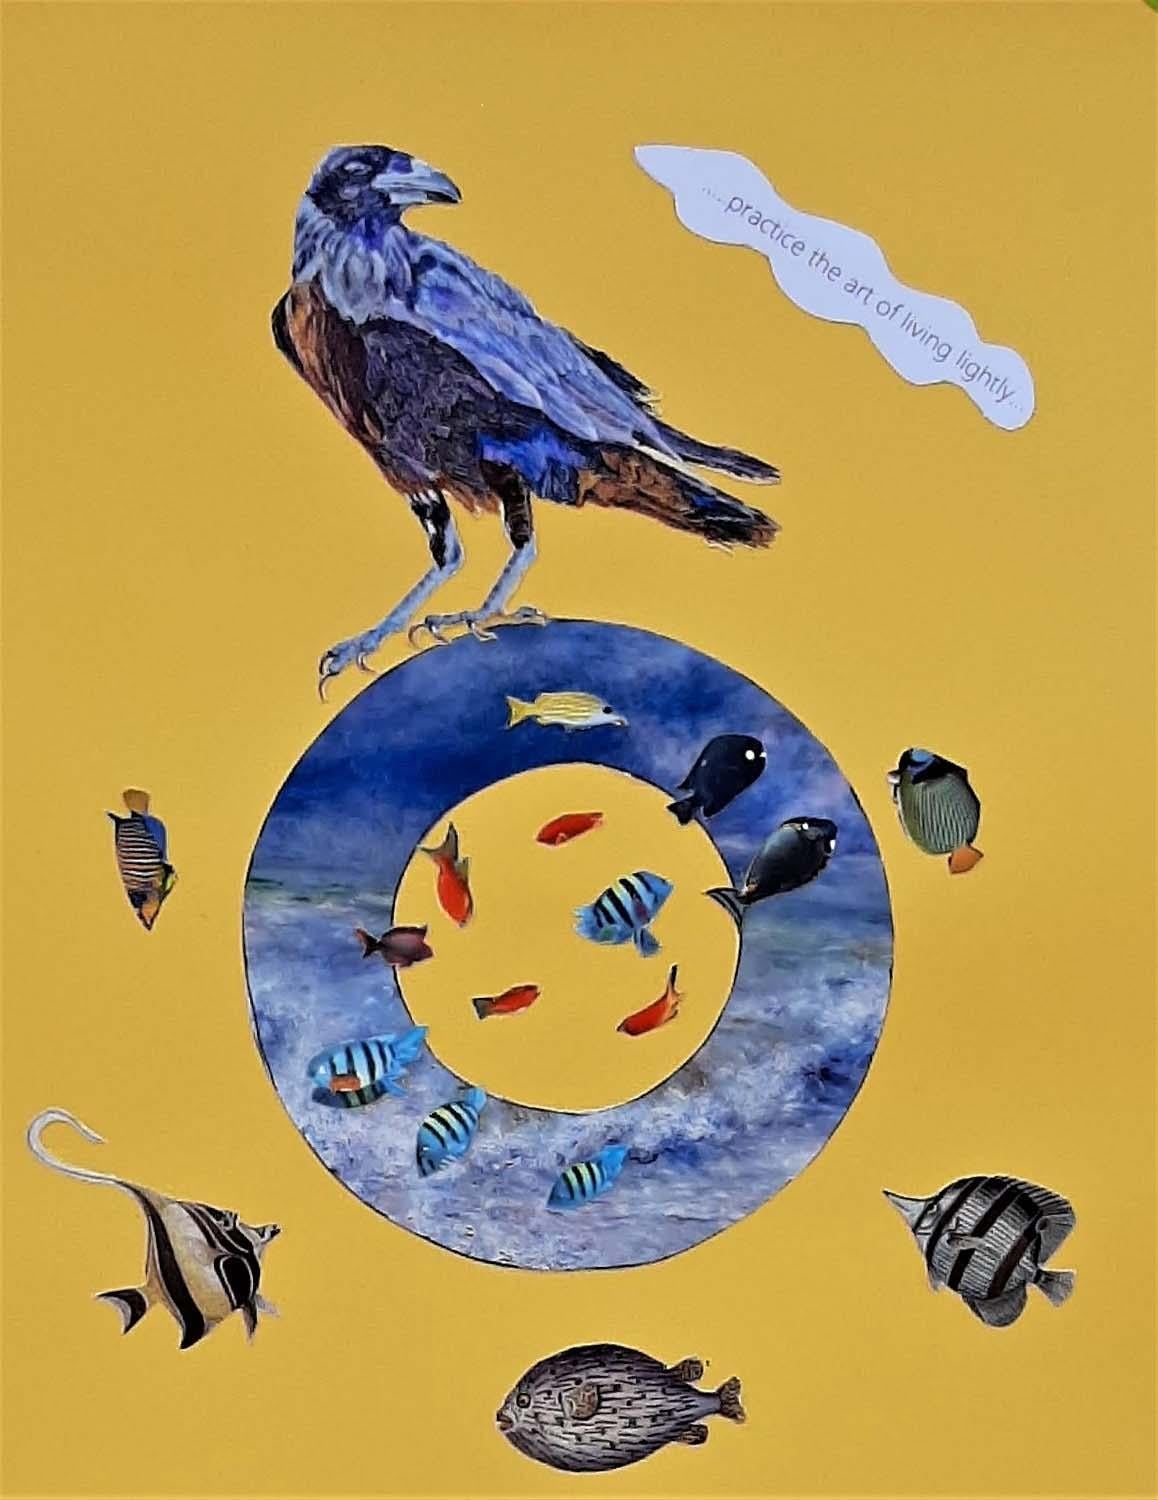 Avian Fables: Practice the art of living lightly… - collage and ink on paper - Mixed Media Art by Alison Keenan